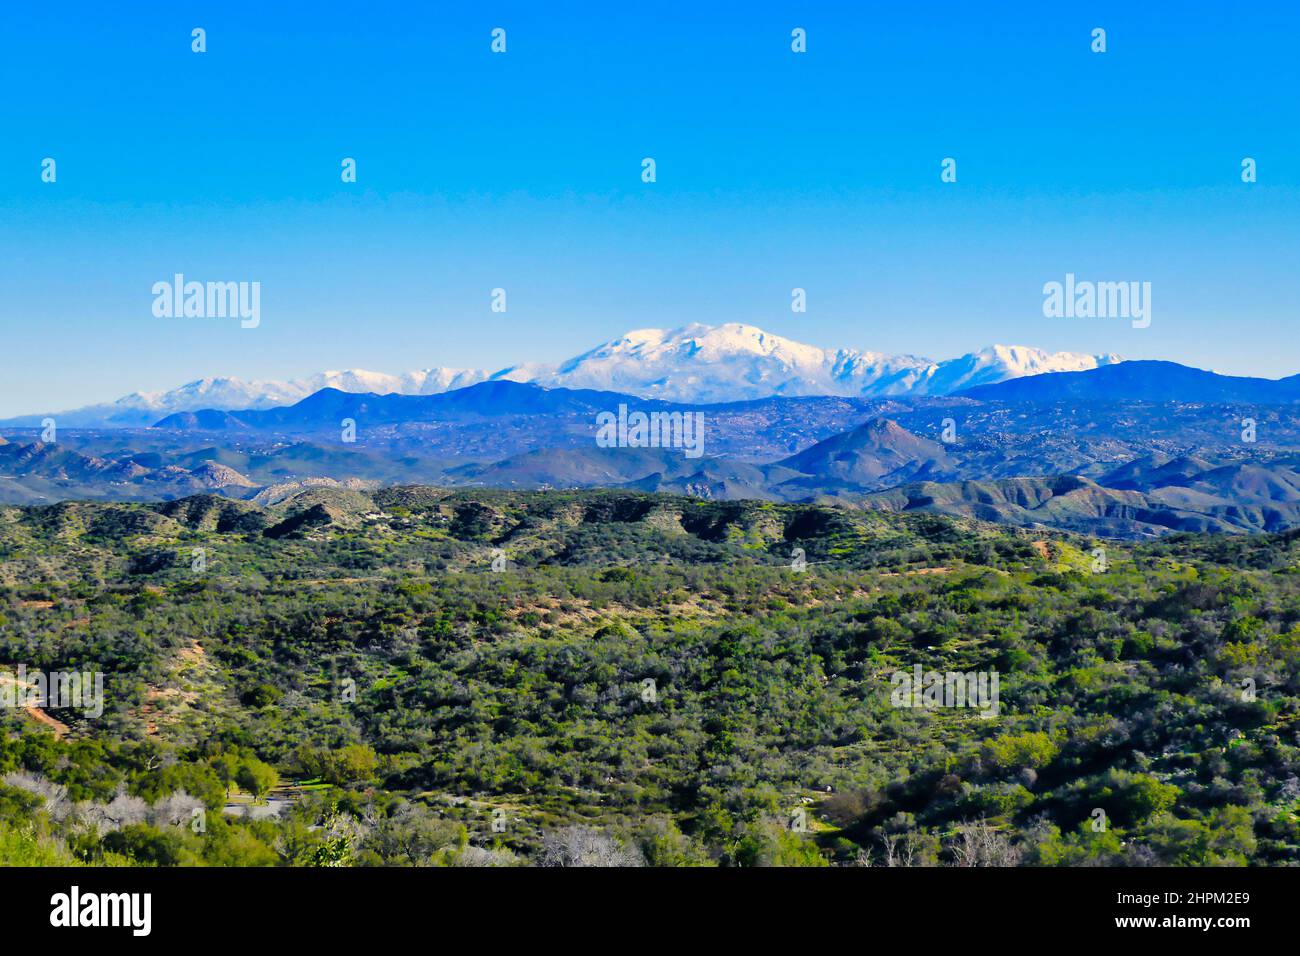 The Agua Tibia Wilderness in Cleveland National Forest, in the background the snowy peaks of the San Jacinto Mountains, Southern California, USA Stock Photo